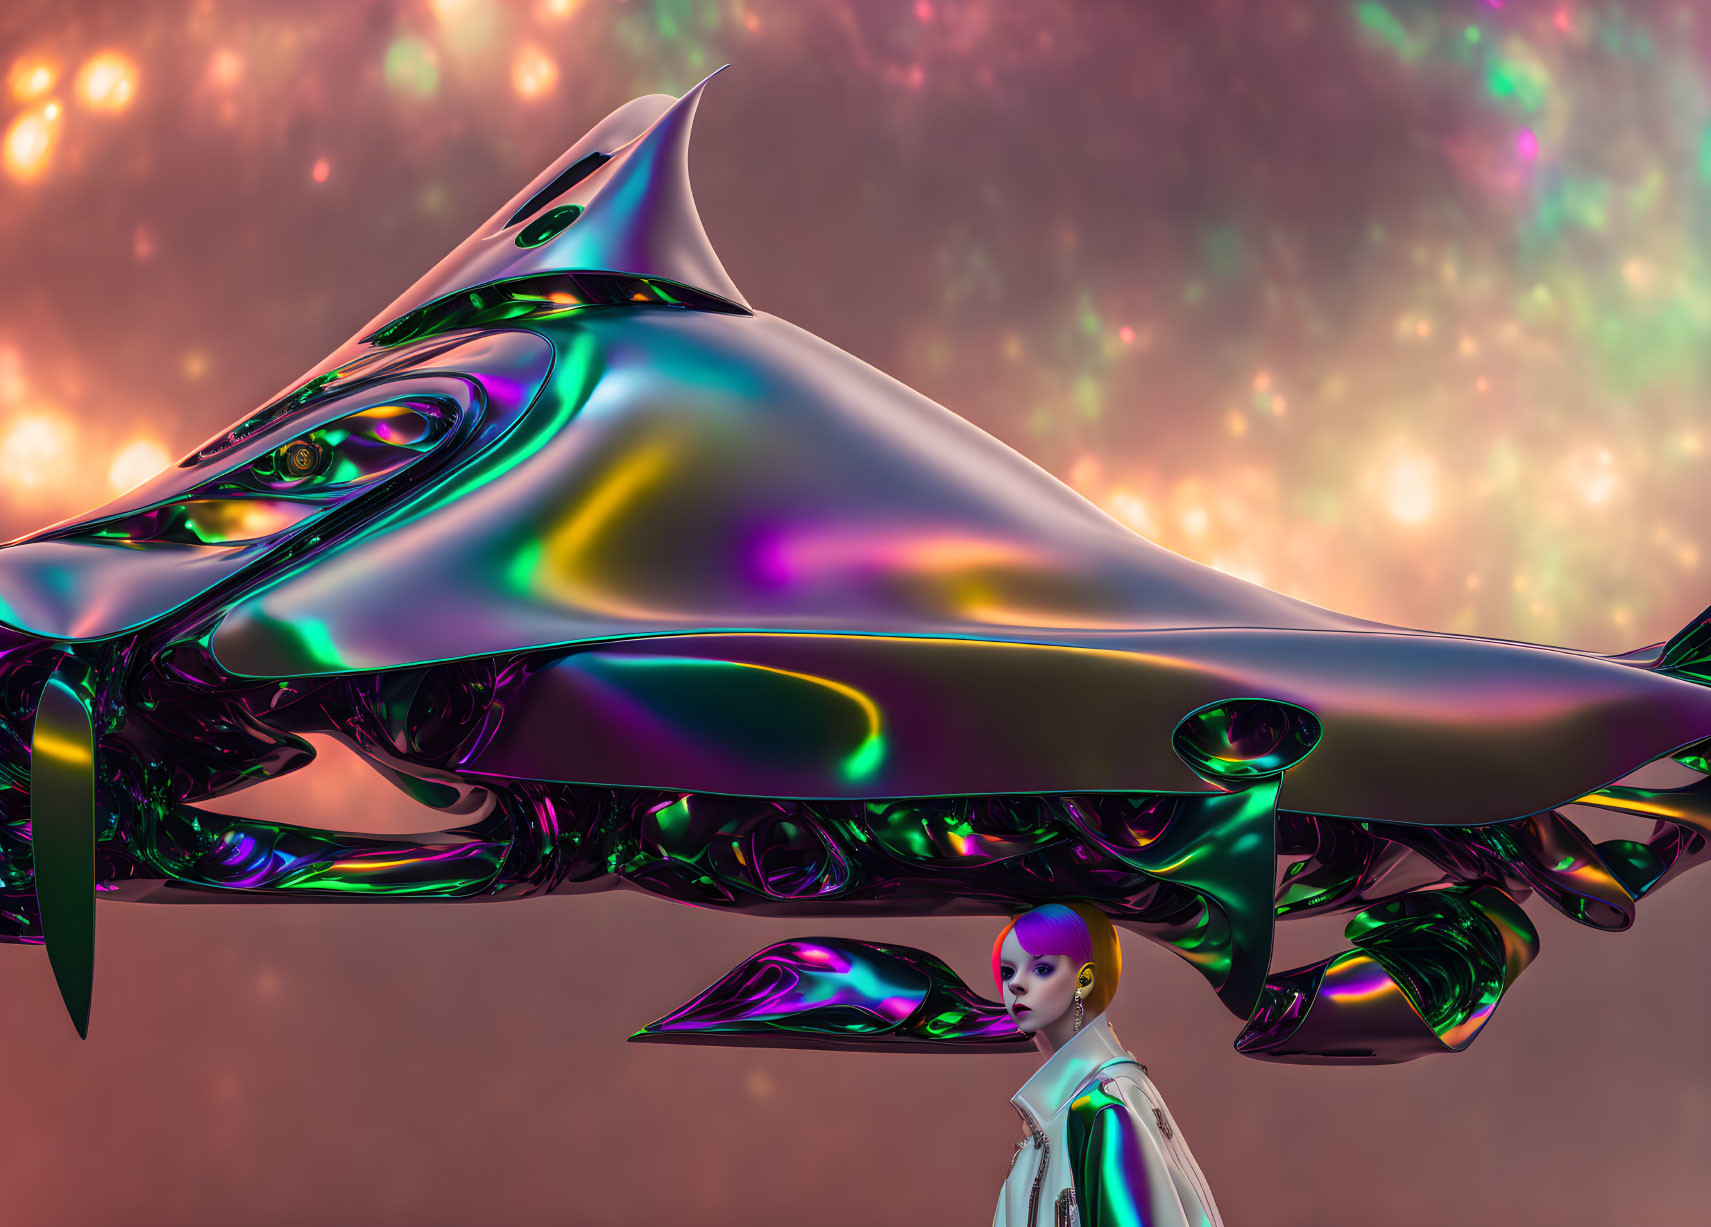 Futuristic chrome spaceship and modern person in iridescent colors against pink nebula.